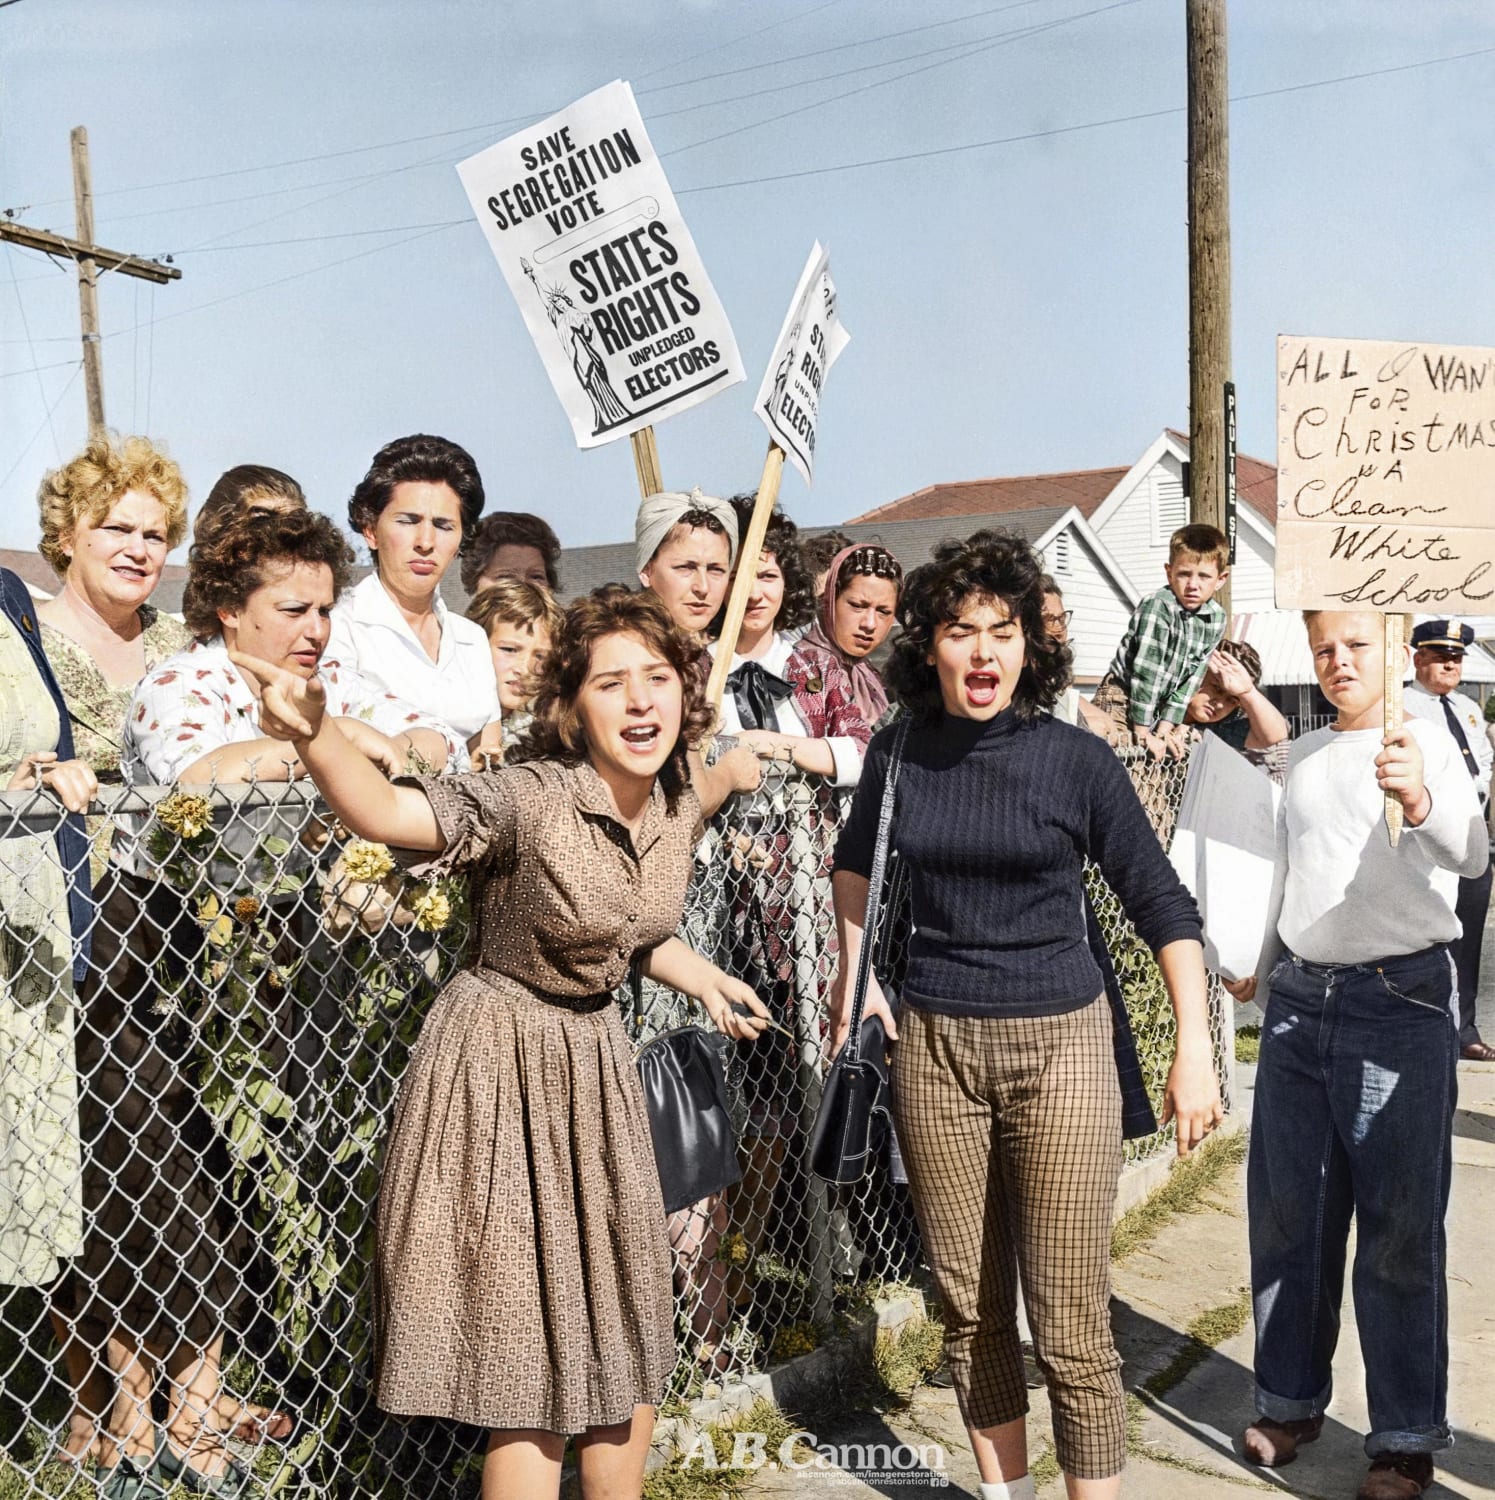 A crowd of angry parents hurl insults at 6 year-old Ruby Bridges as she enters a traditionally all-white school, the first black child to do so in the United States South, 1960. Bridges is just 67 today. (Colorized by me)